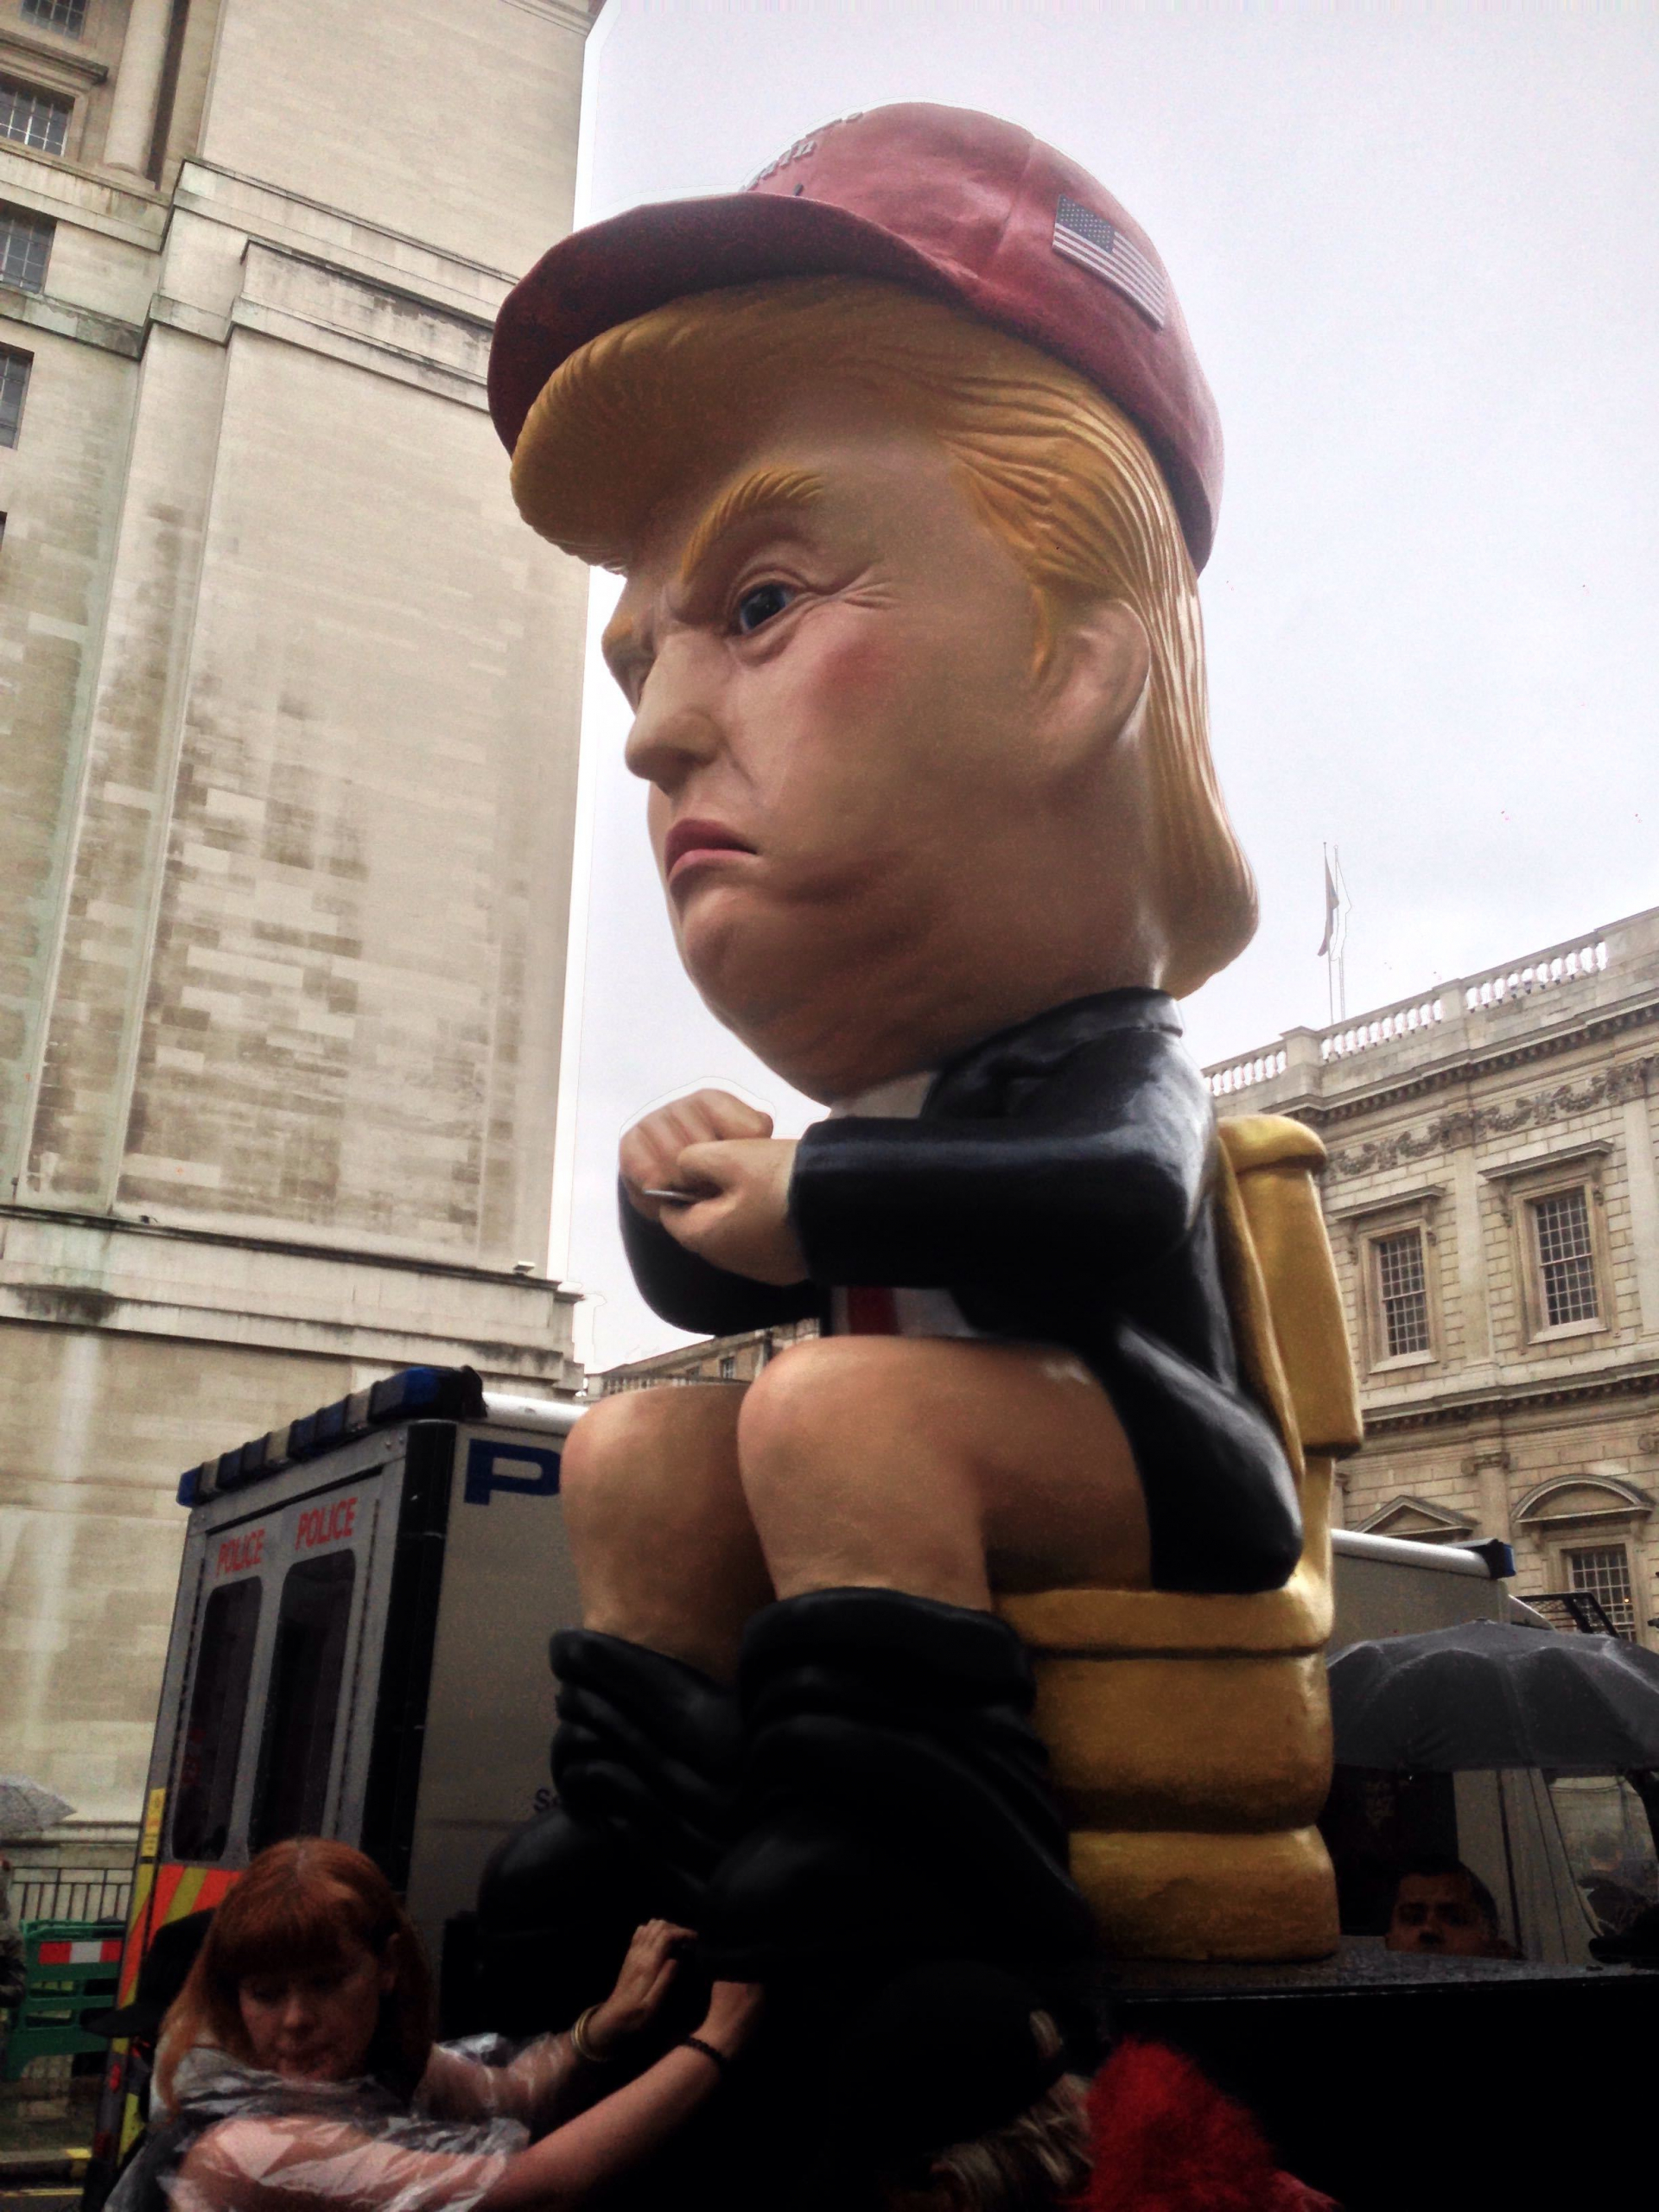 London's Trump Protest: A Photographic Journey